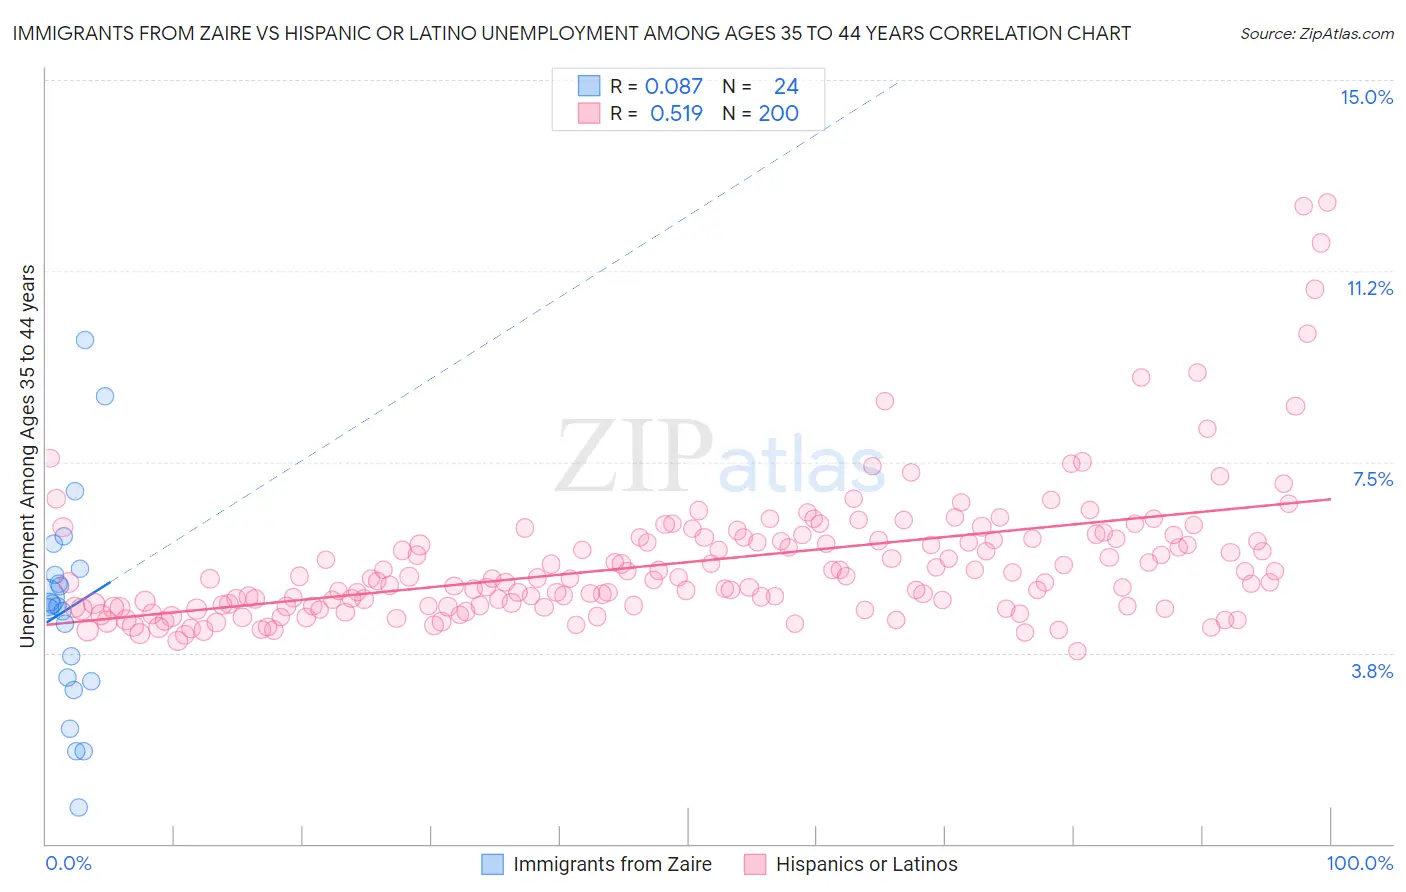 Immigrants from Zaire vs Hispanic or Latino Unemployment Among Ages 35 to 44 years